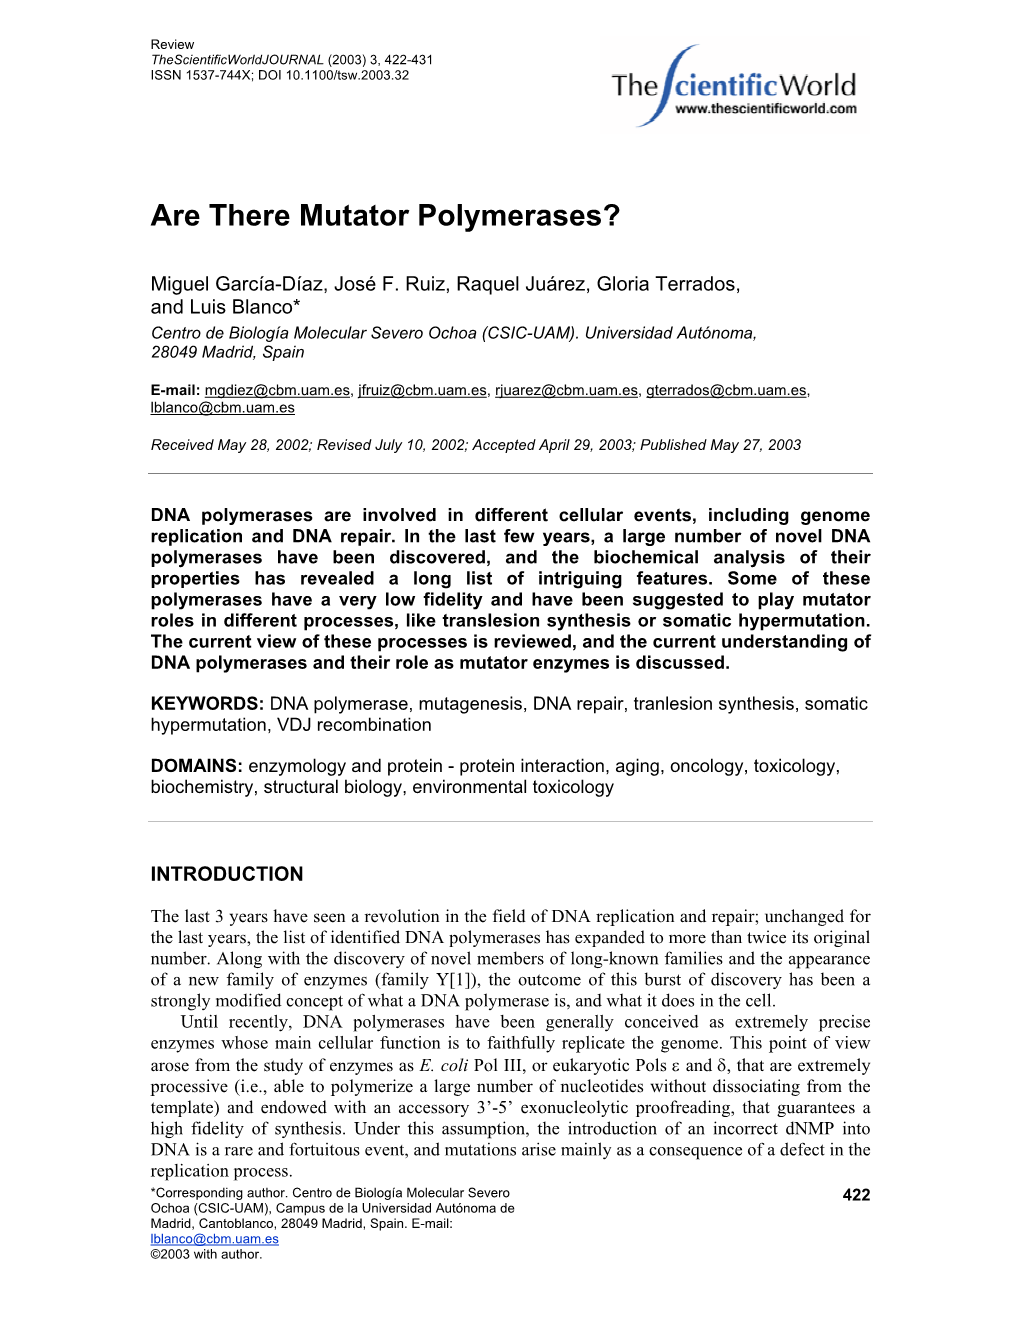 Are There Mutator Polymerases?